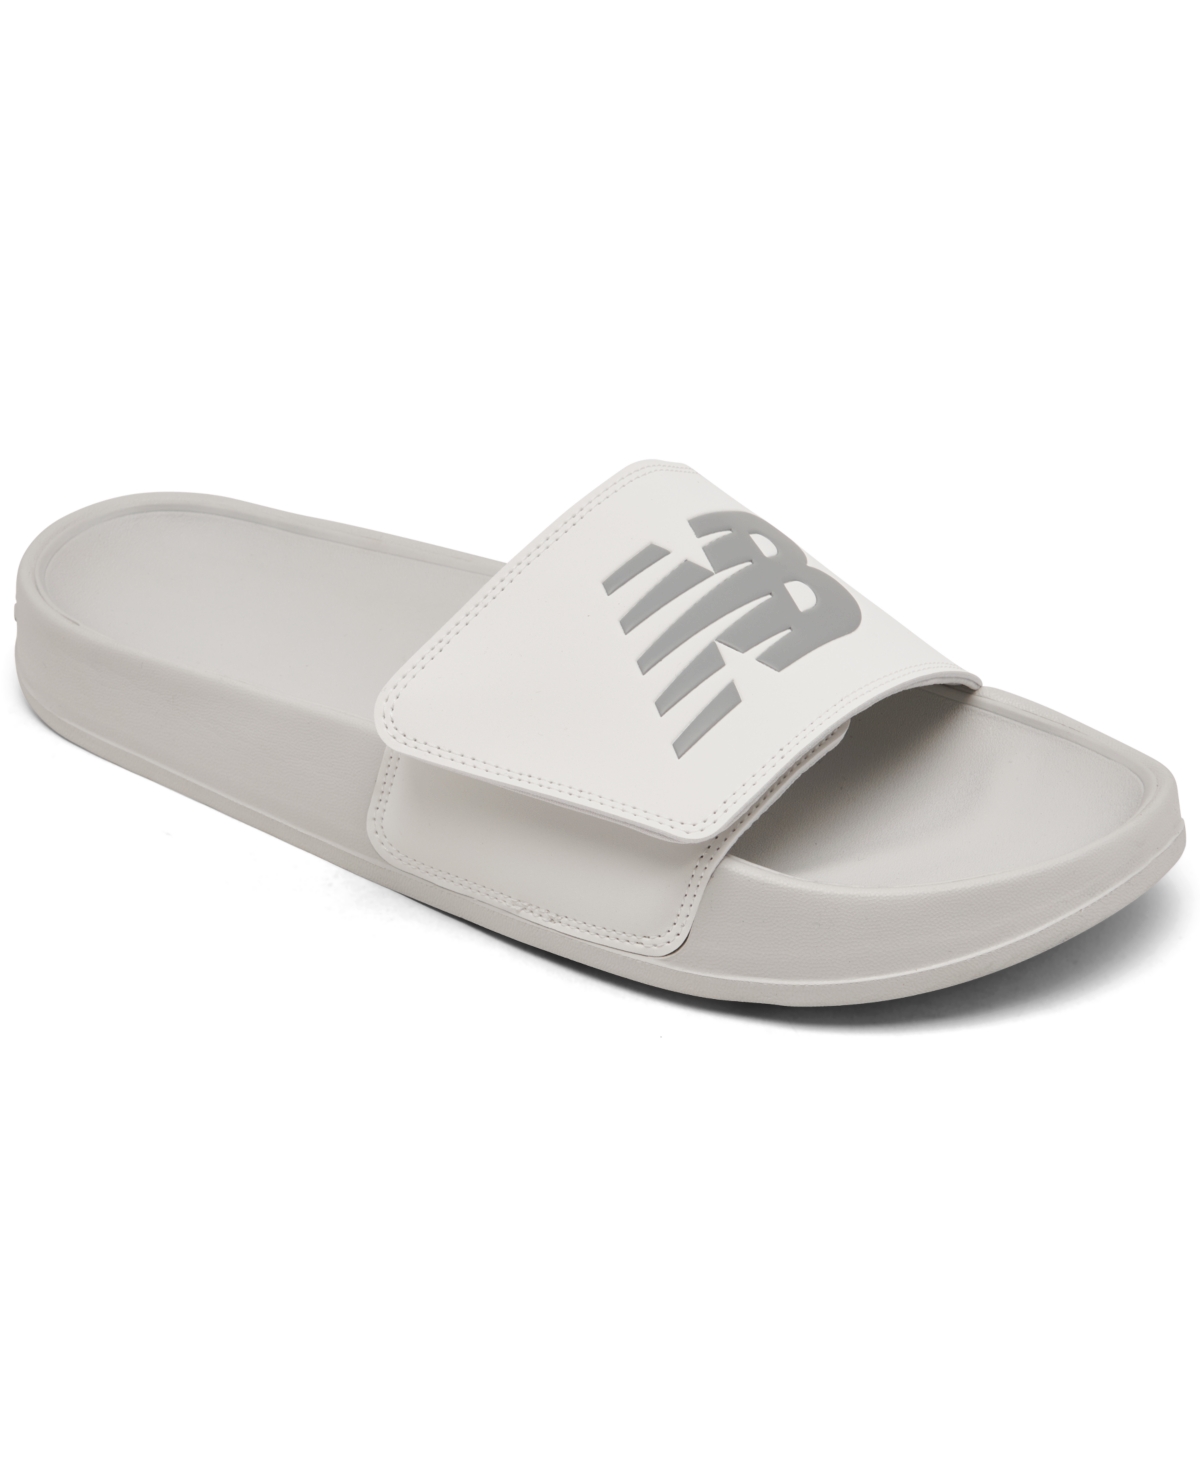 Men's 200 Adjustable Strap Sandals from Finish Line - White, Grey